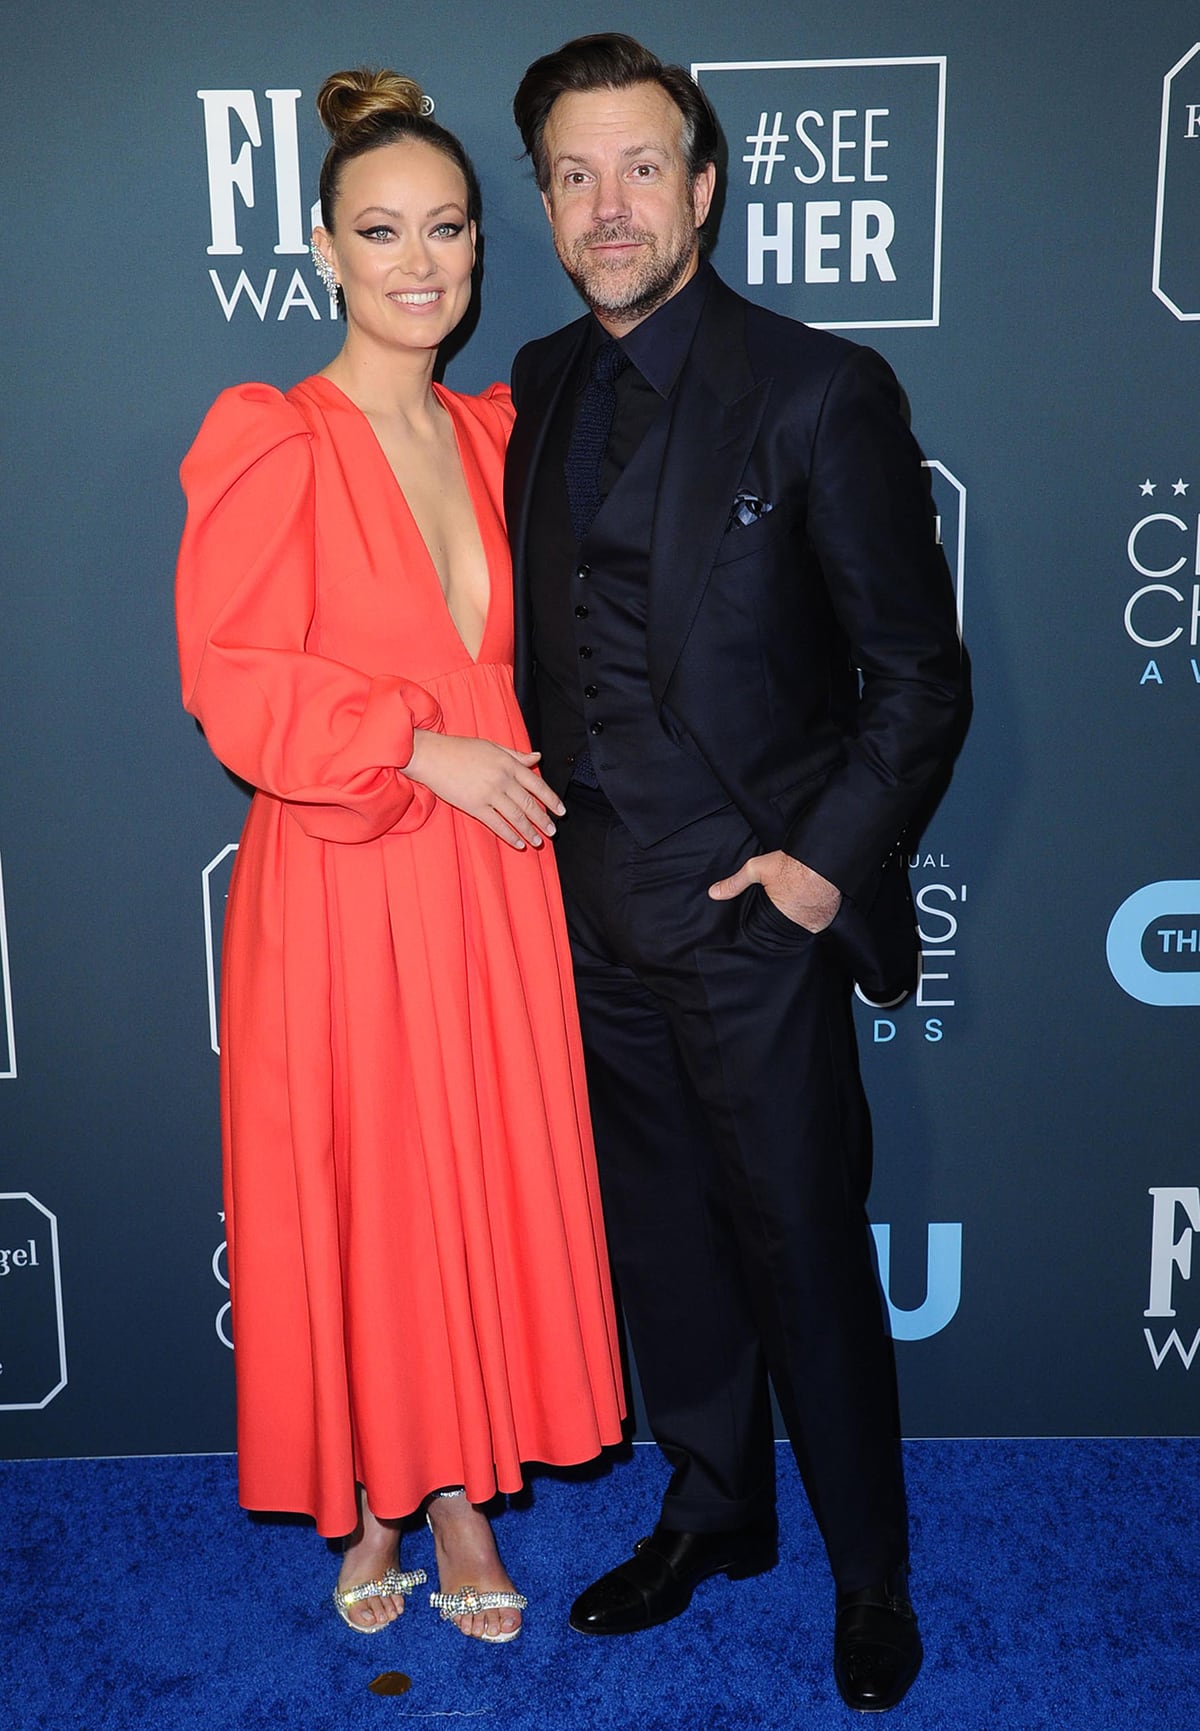 Olivia Wilde and Jason Sudeikis pose together at the 25th Annual Critics Choice Award in 2020